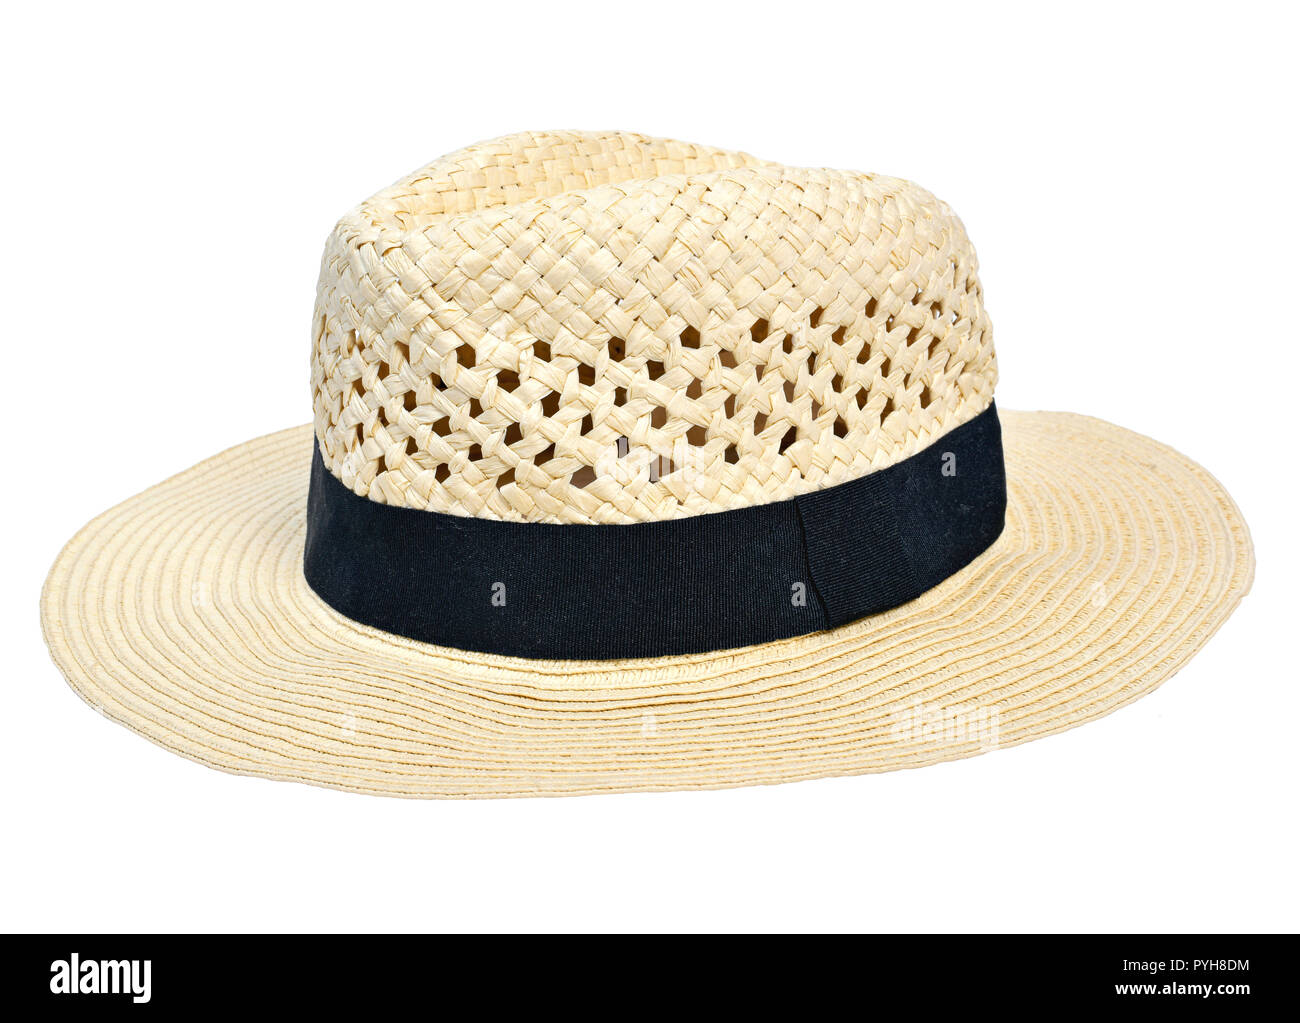 Panama hat, traditional summer hat with black hatband or ribbon, isolated on white background. Cut out object with top view or high angle view. Stock Photo